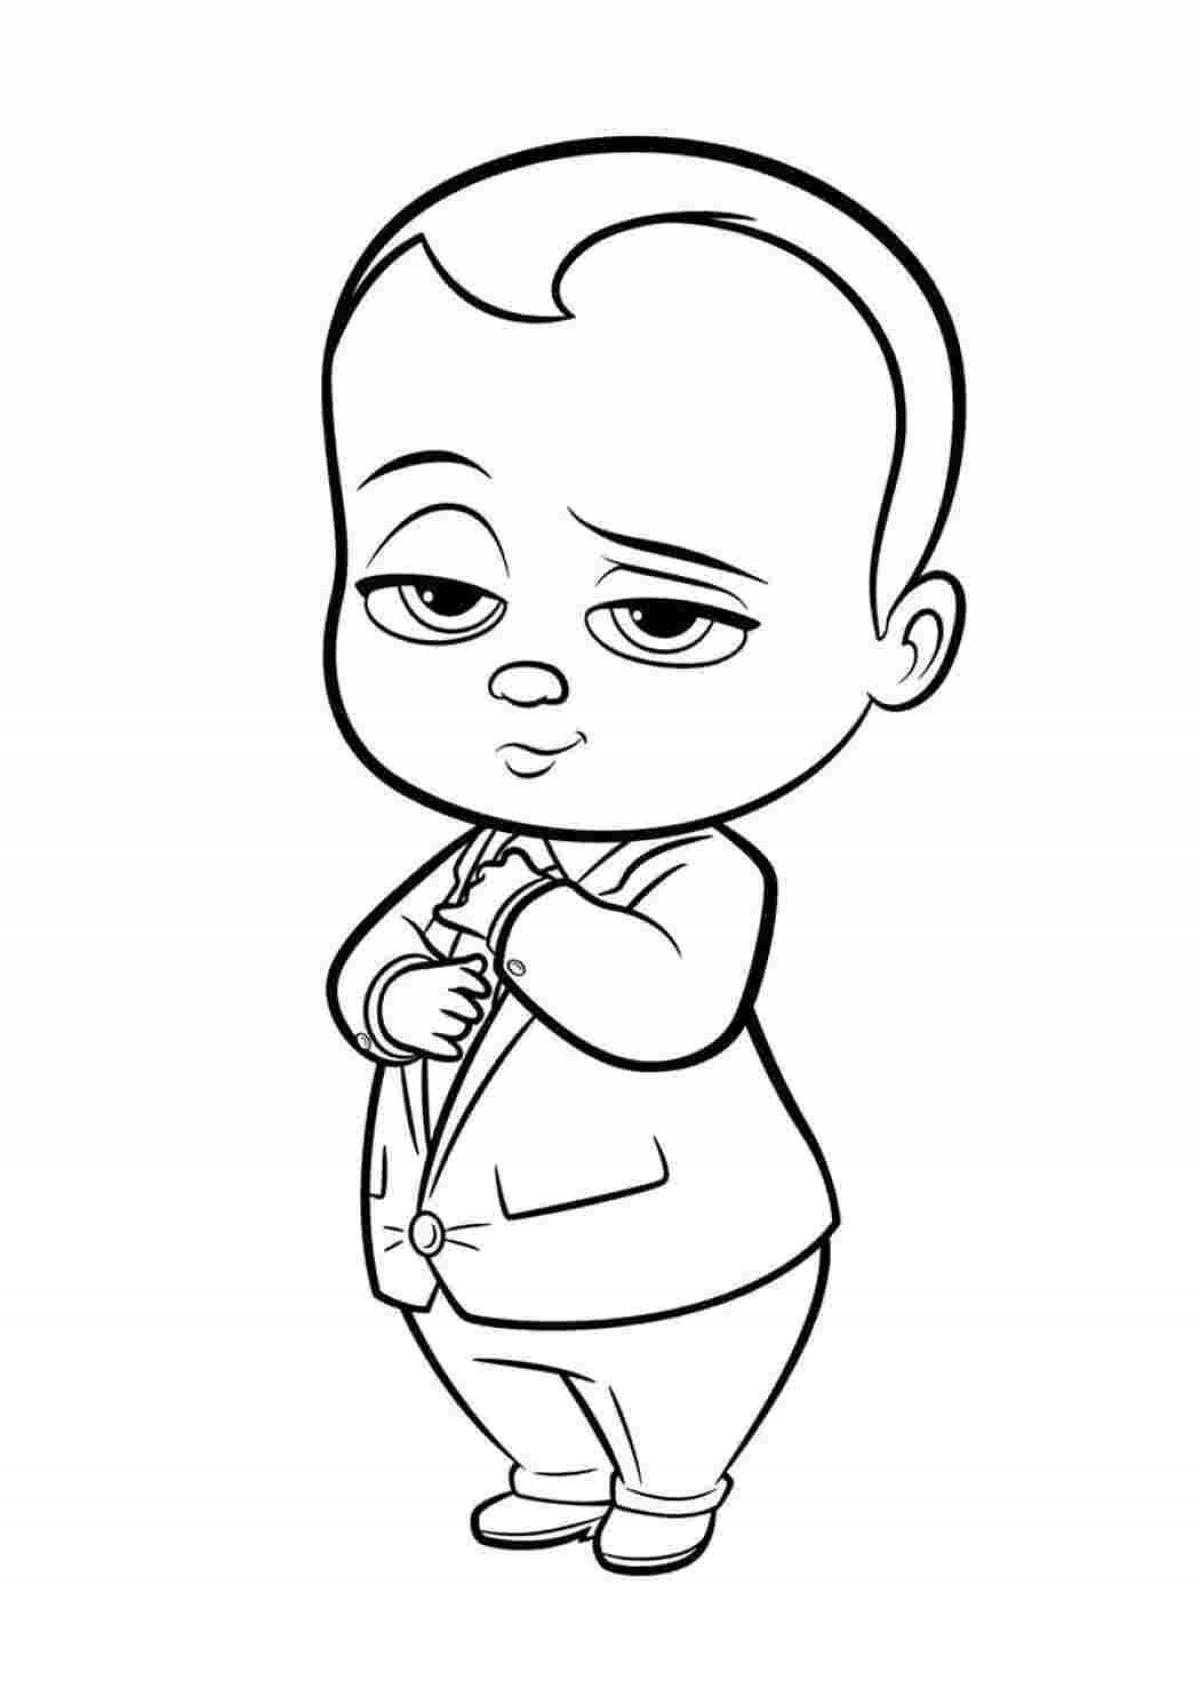 Boss baby 2 amazing coloring book